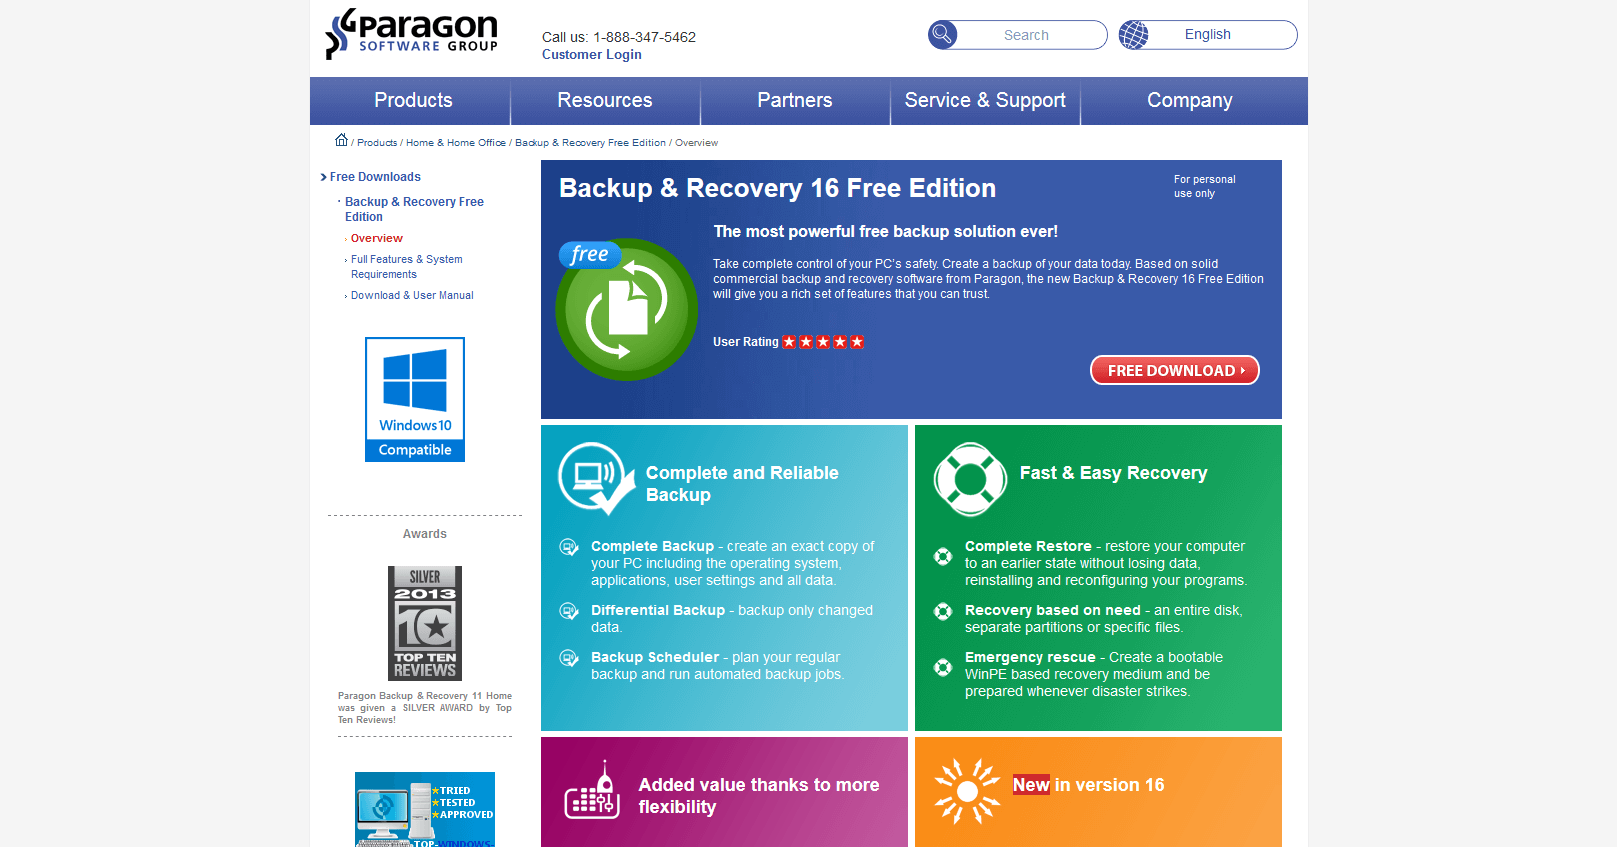 Produkt-Website: Paragon Backup & Recovery 16 Free